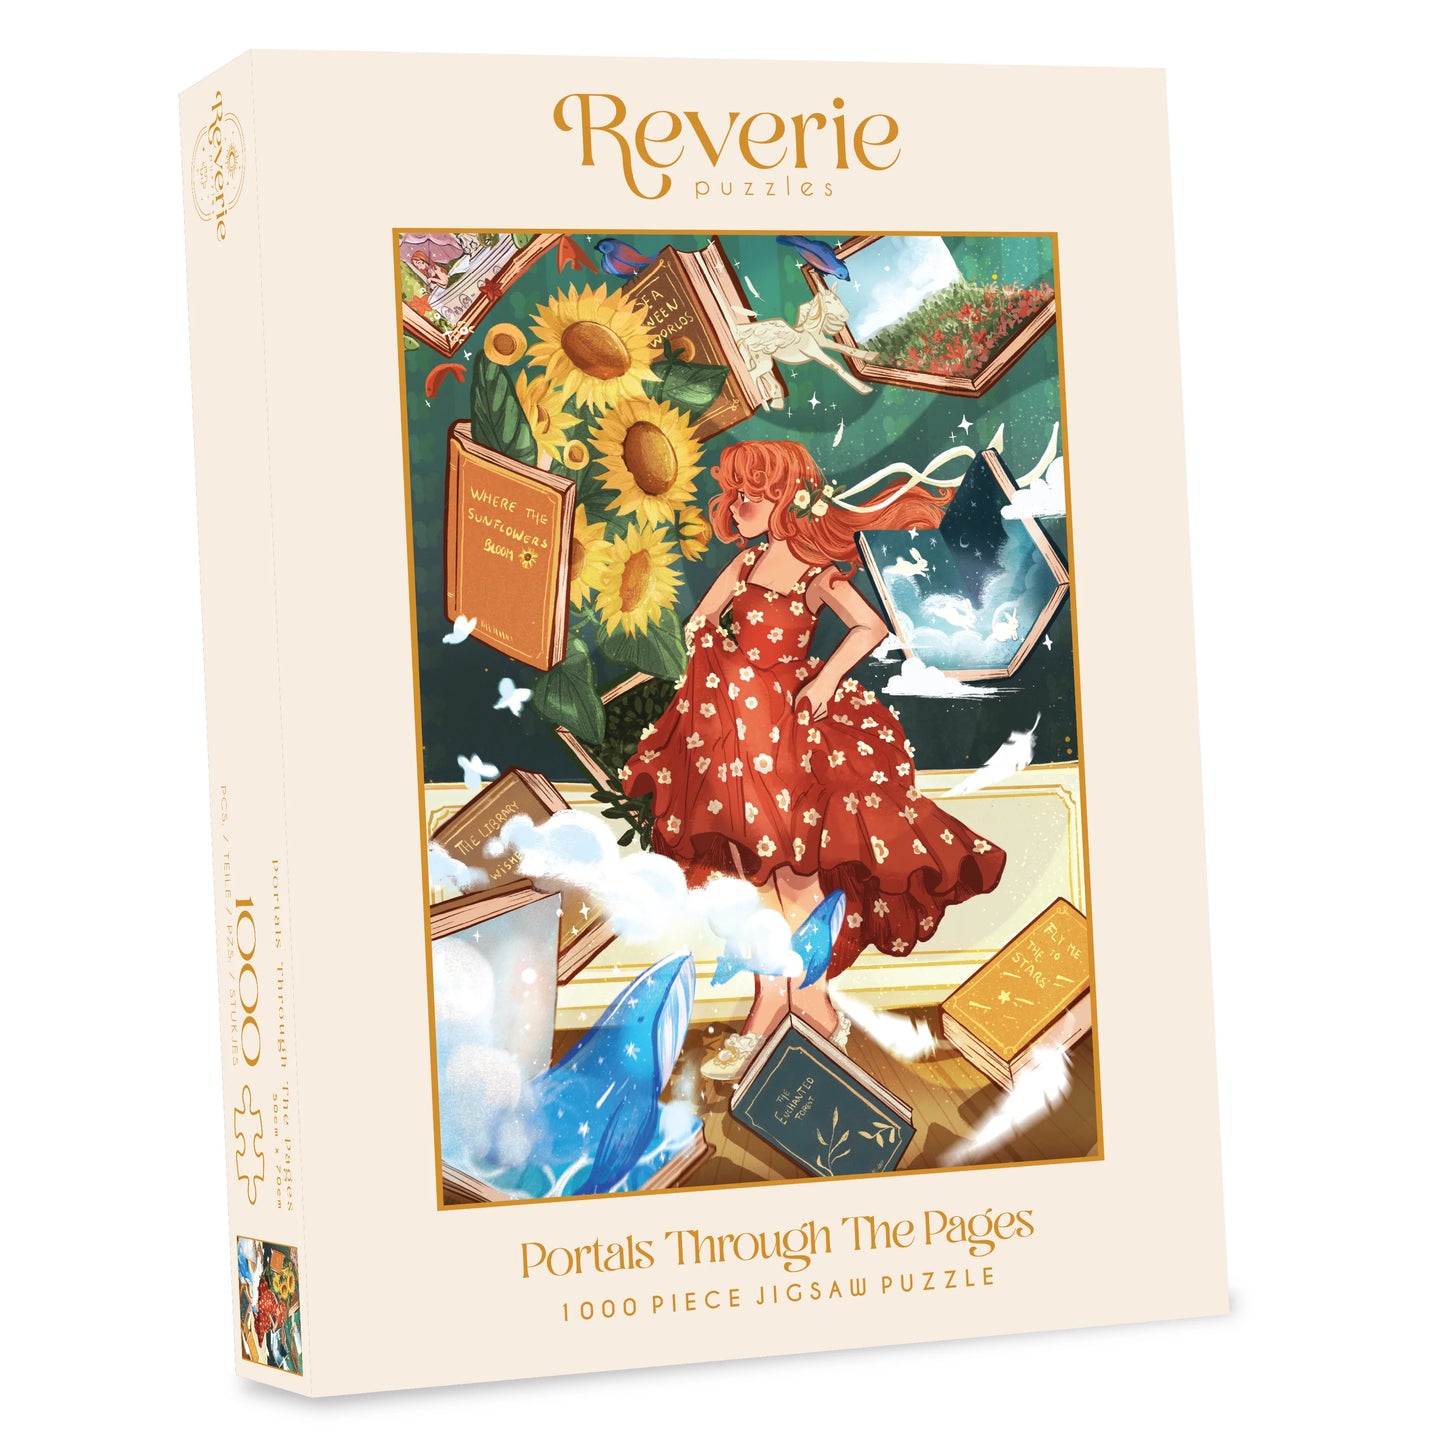 Portals Through The Pages by Reverie Puzzles 1000pc